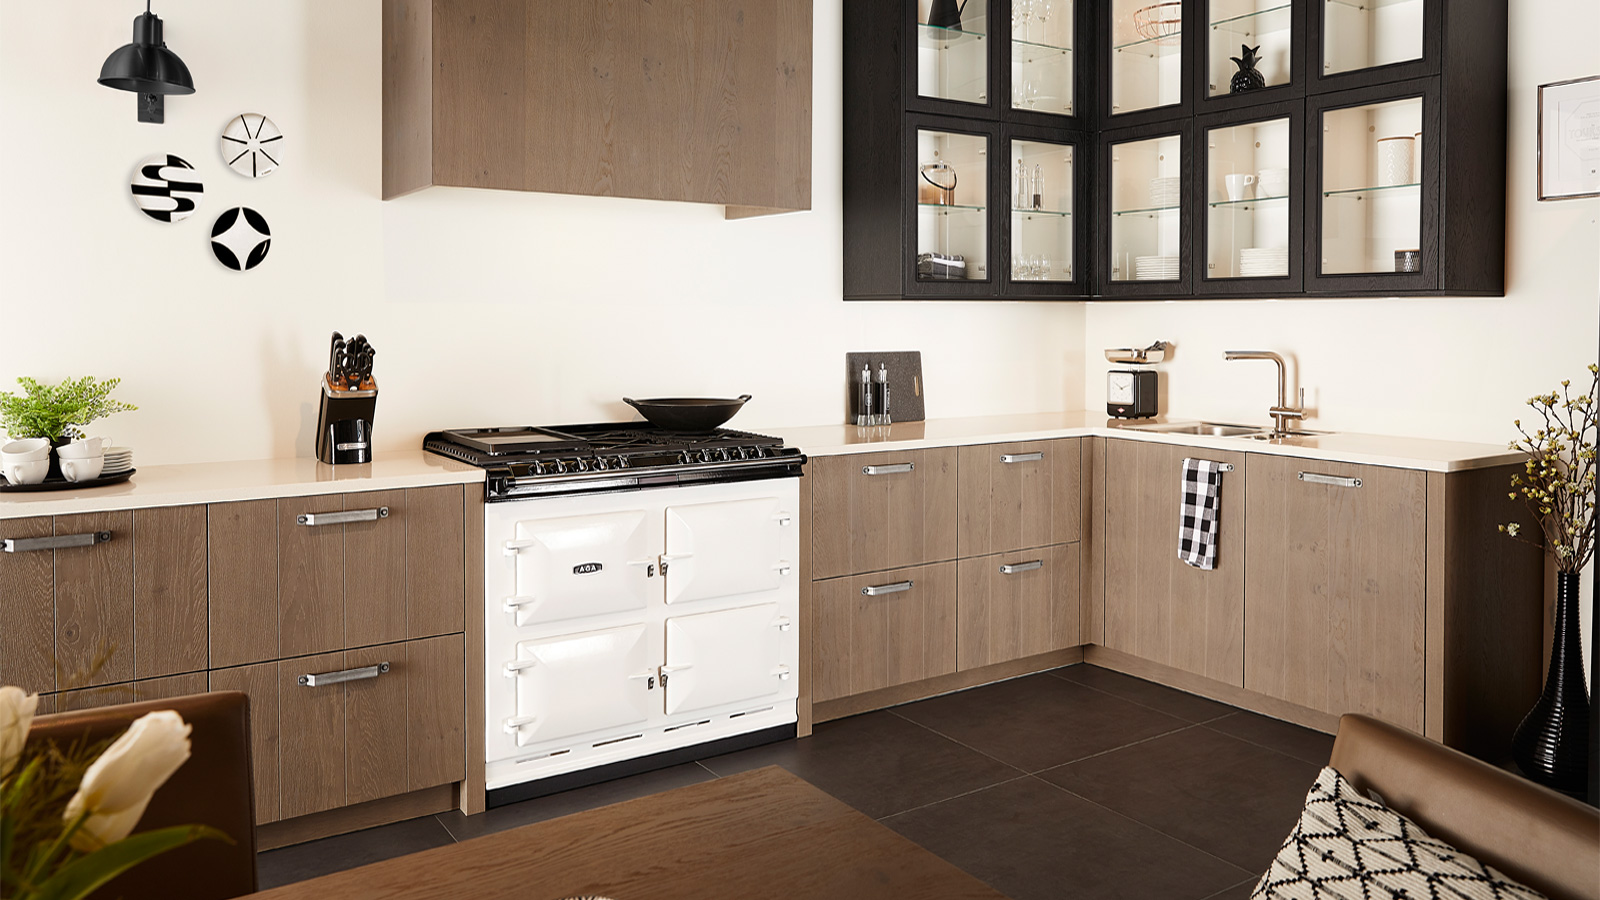 Keller Kitchens introduces Winchester